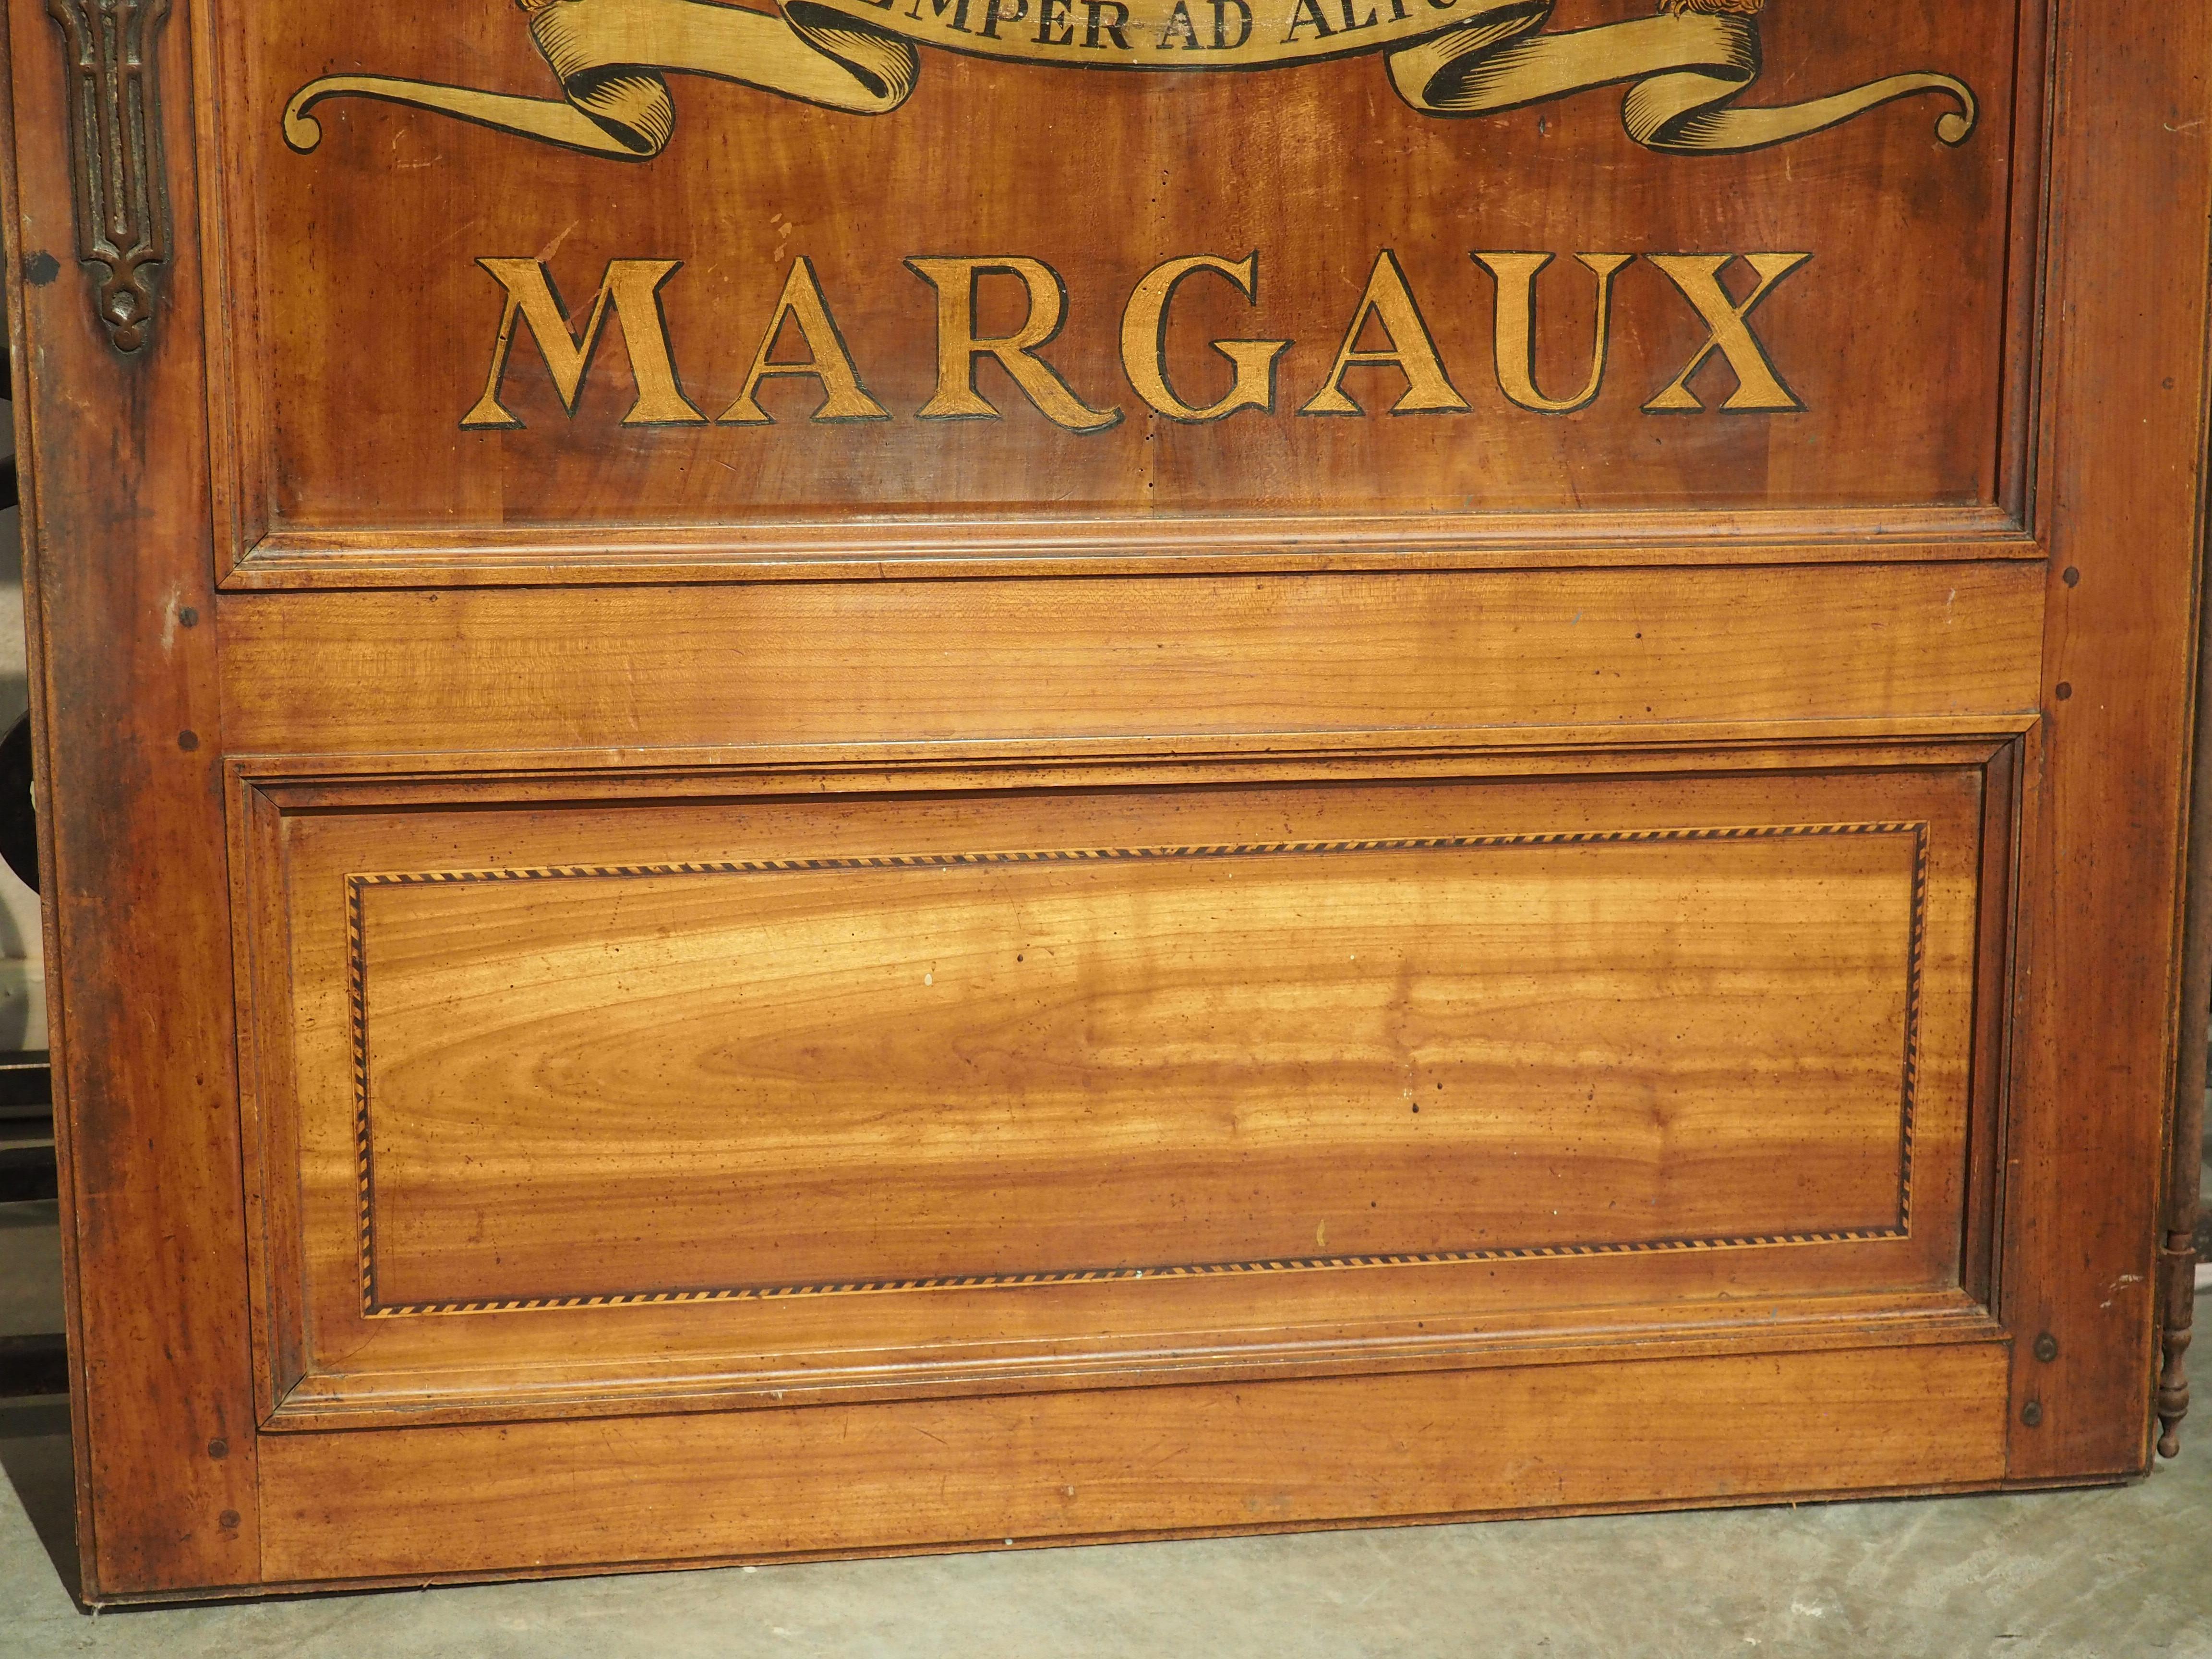 Originally part of a large antique French cabinet (Buffet Deux Corps), this cherrywood door has a stylized logo of a Medoc region vineyard painted on the frontage. The main panel of the rectangular door has a shaped upper molding with a pair of